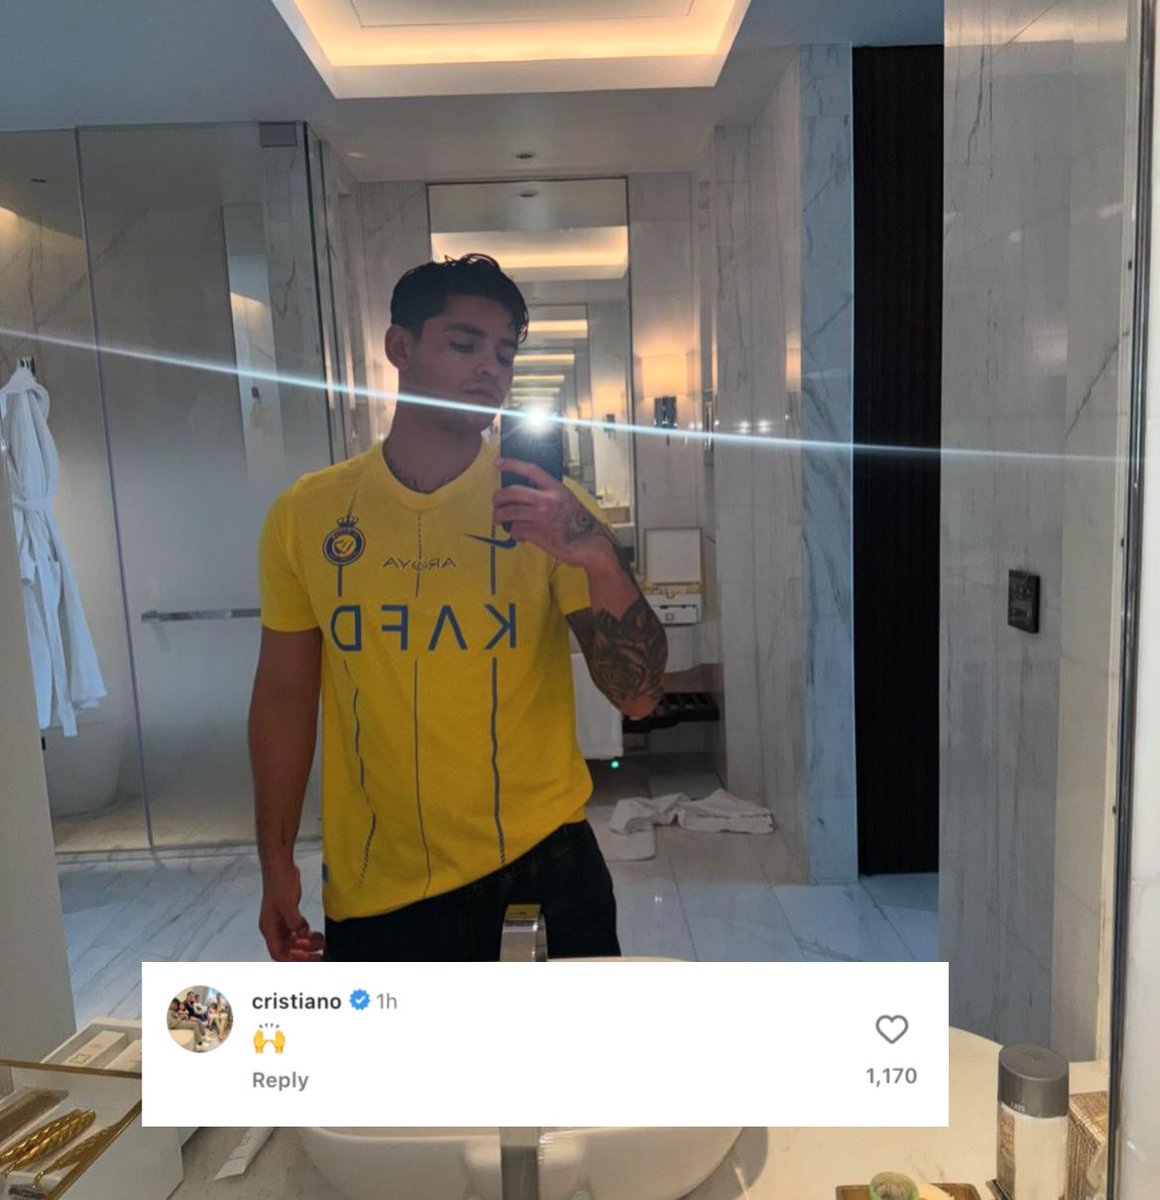 ‼️Cristiano's comment on boxer Ryan Garcia's post while wearing his shirt 💛